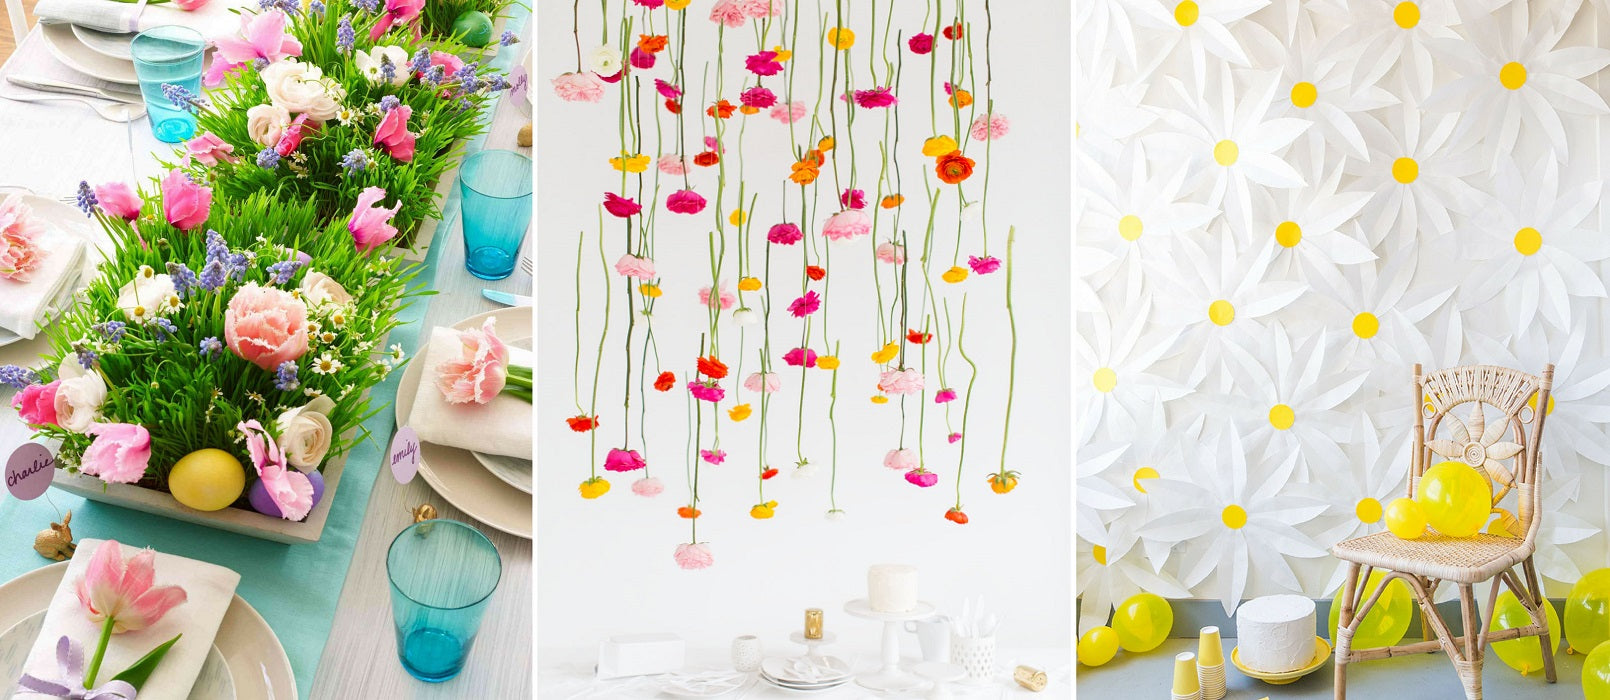 14 Adorable Spring Decoration Ideas to Bring Floral Magic At home BBCrafts.com